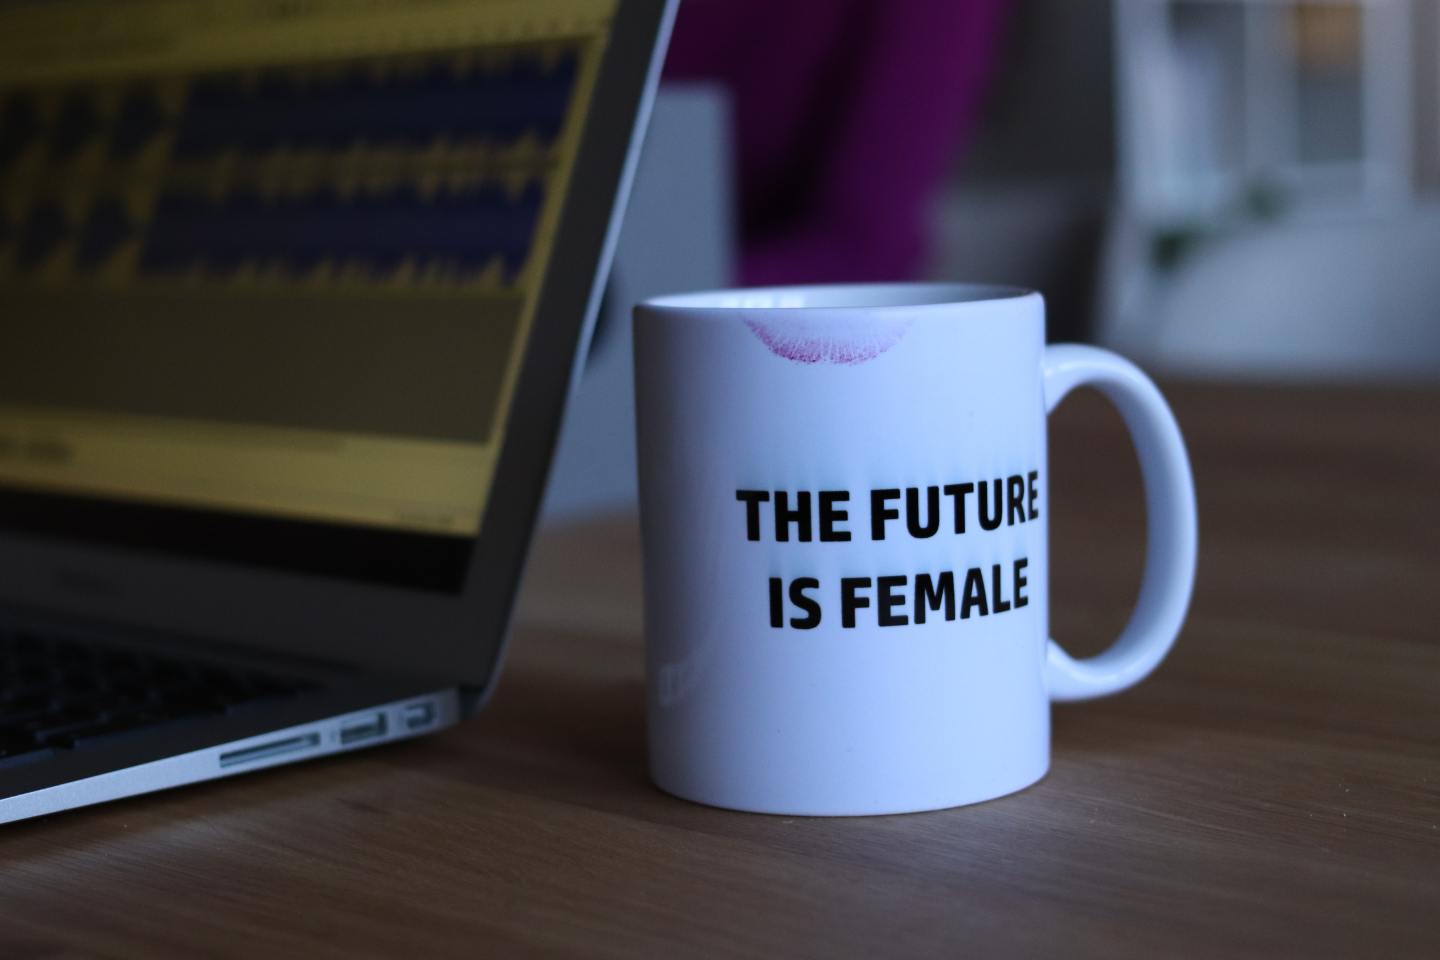 white mug that reads "The Future is Female" setting on desk next to computer - Why Fashion Is Political